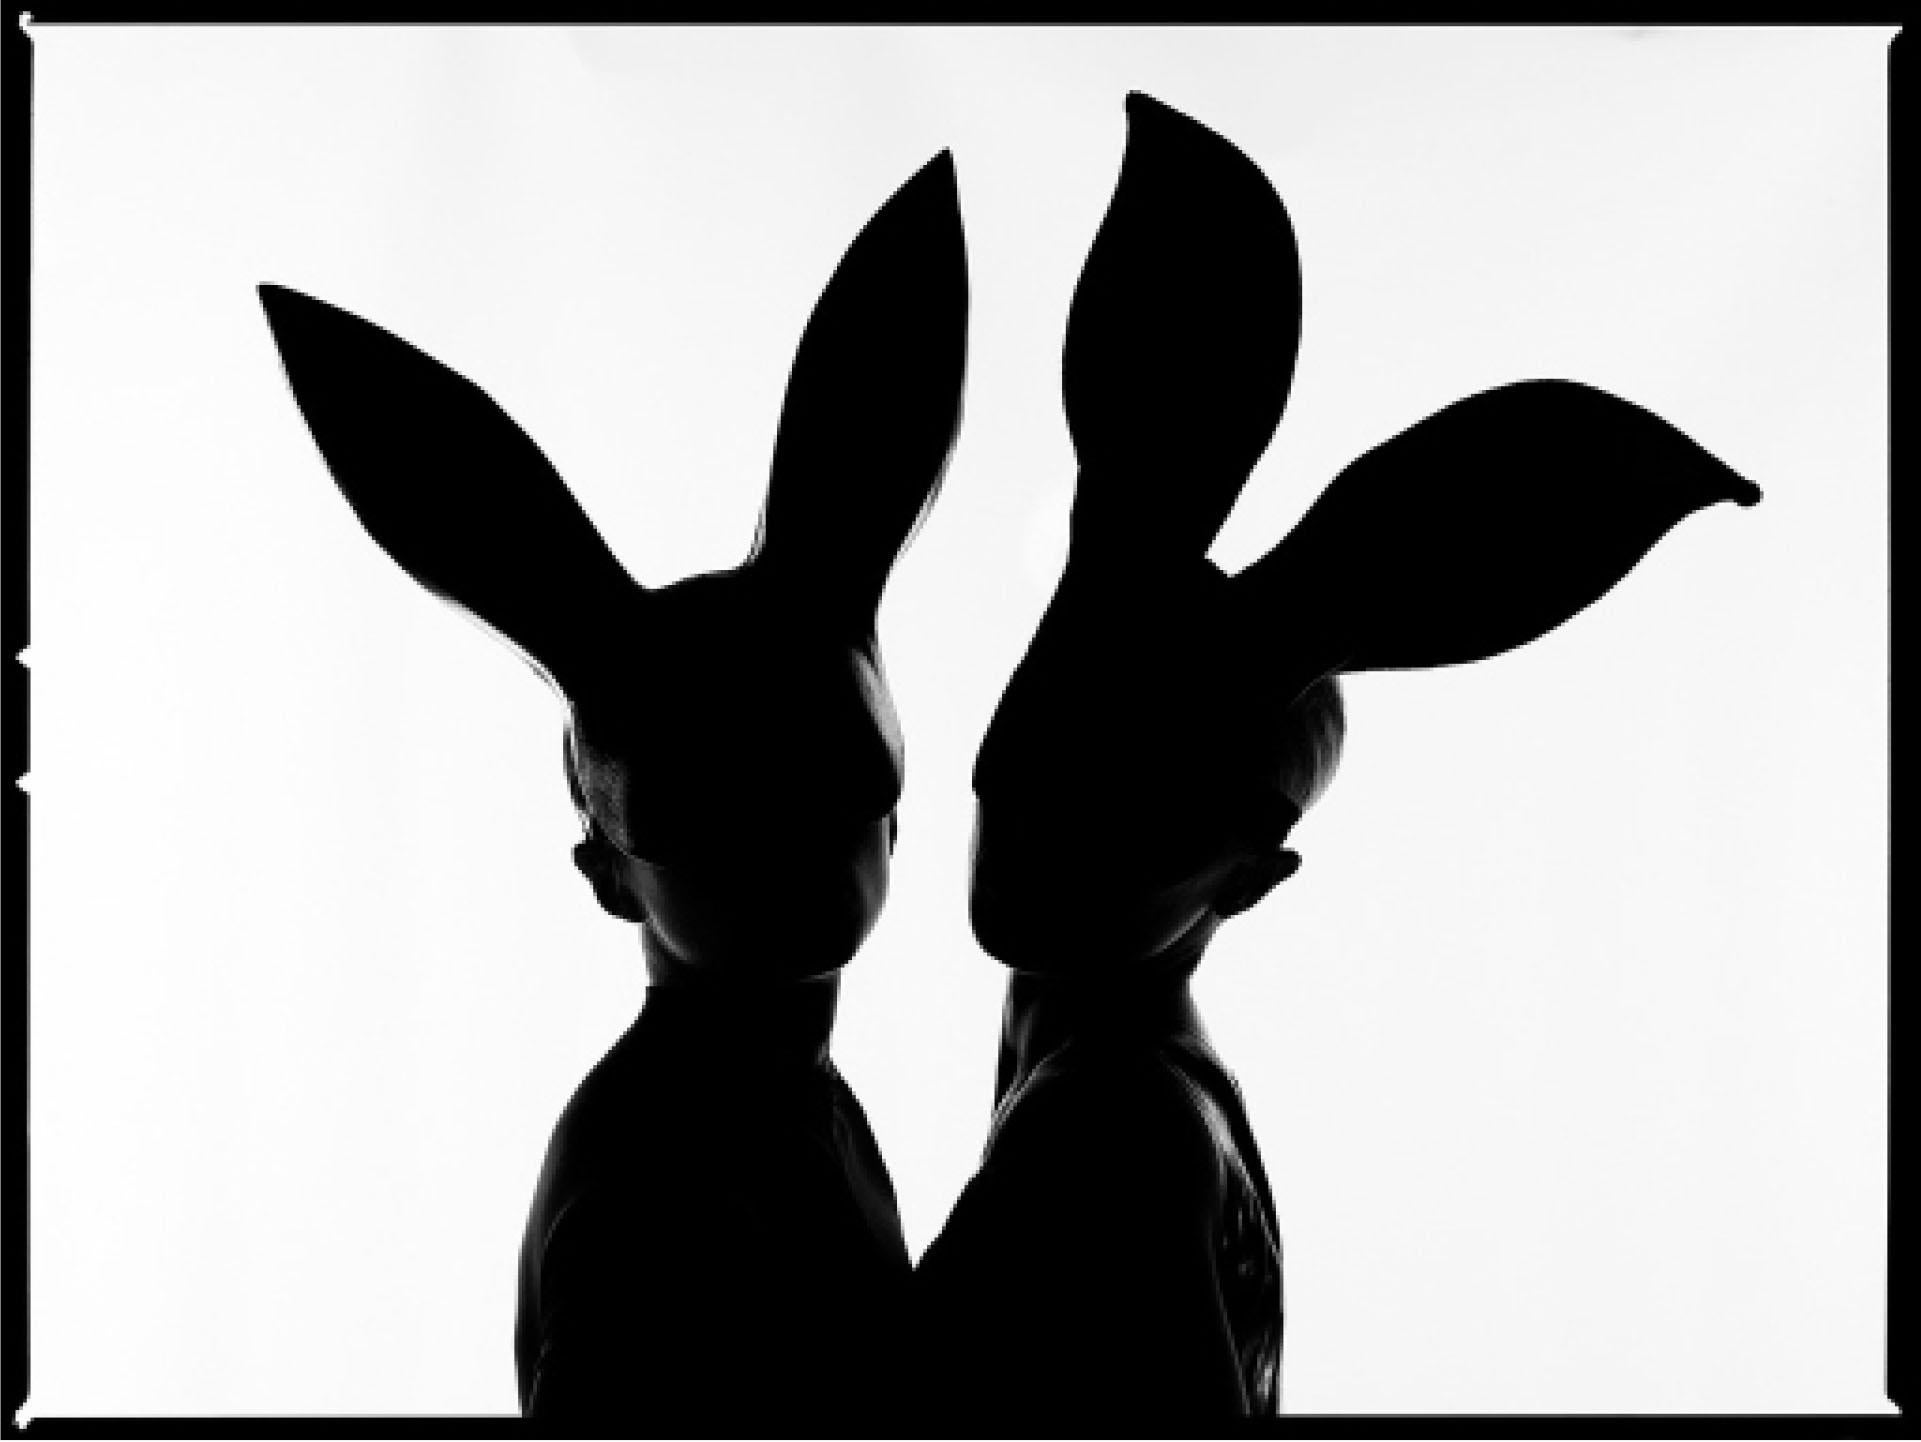 Tyler Shields Black and White Photograph - Bunnies Silhouette (54" x 72")